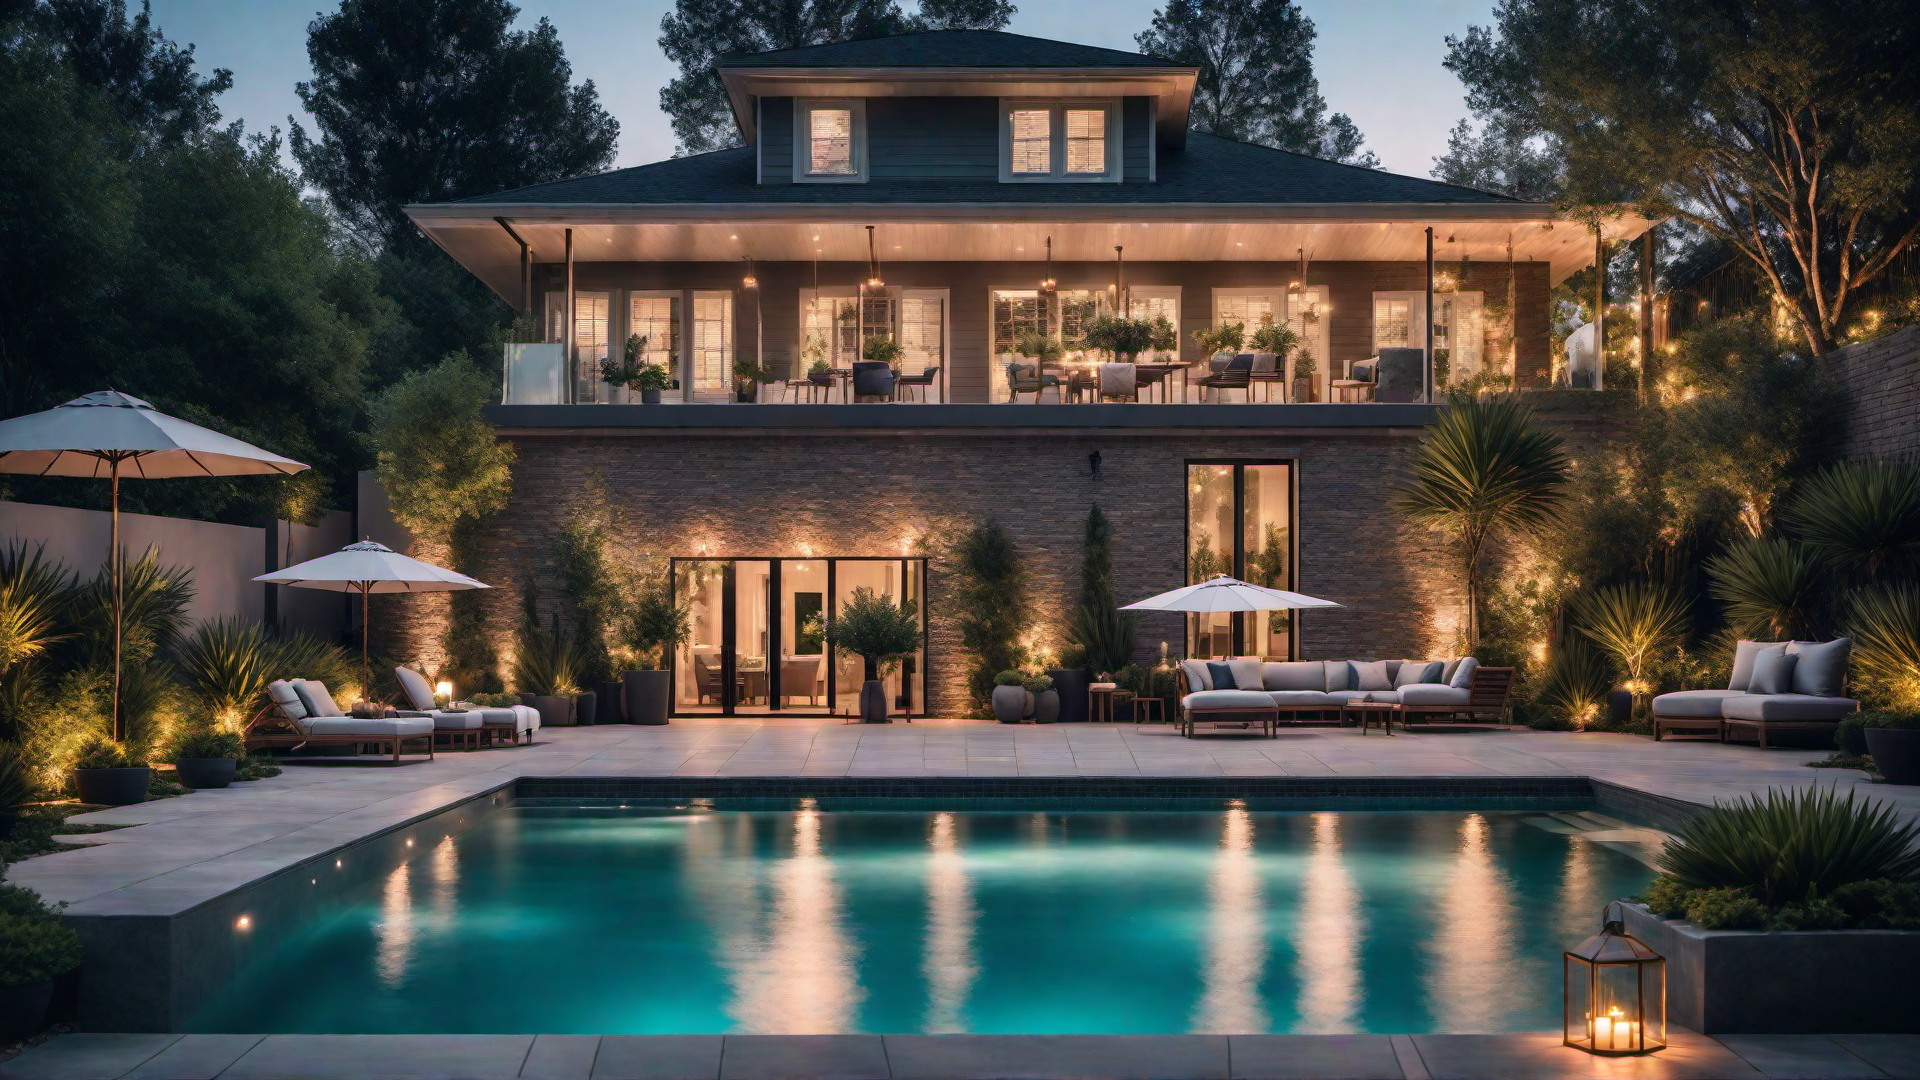 Nighttime Elegance: Pool with Ambient Lighting